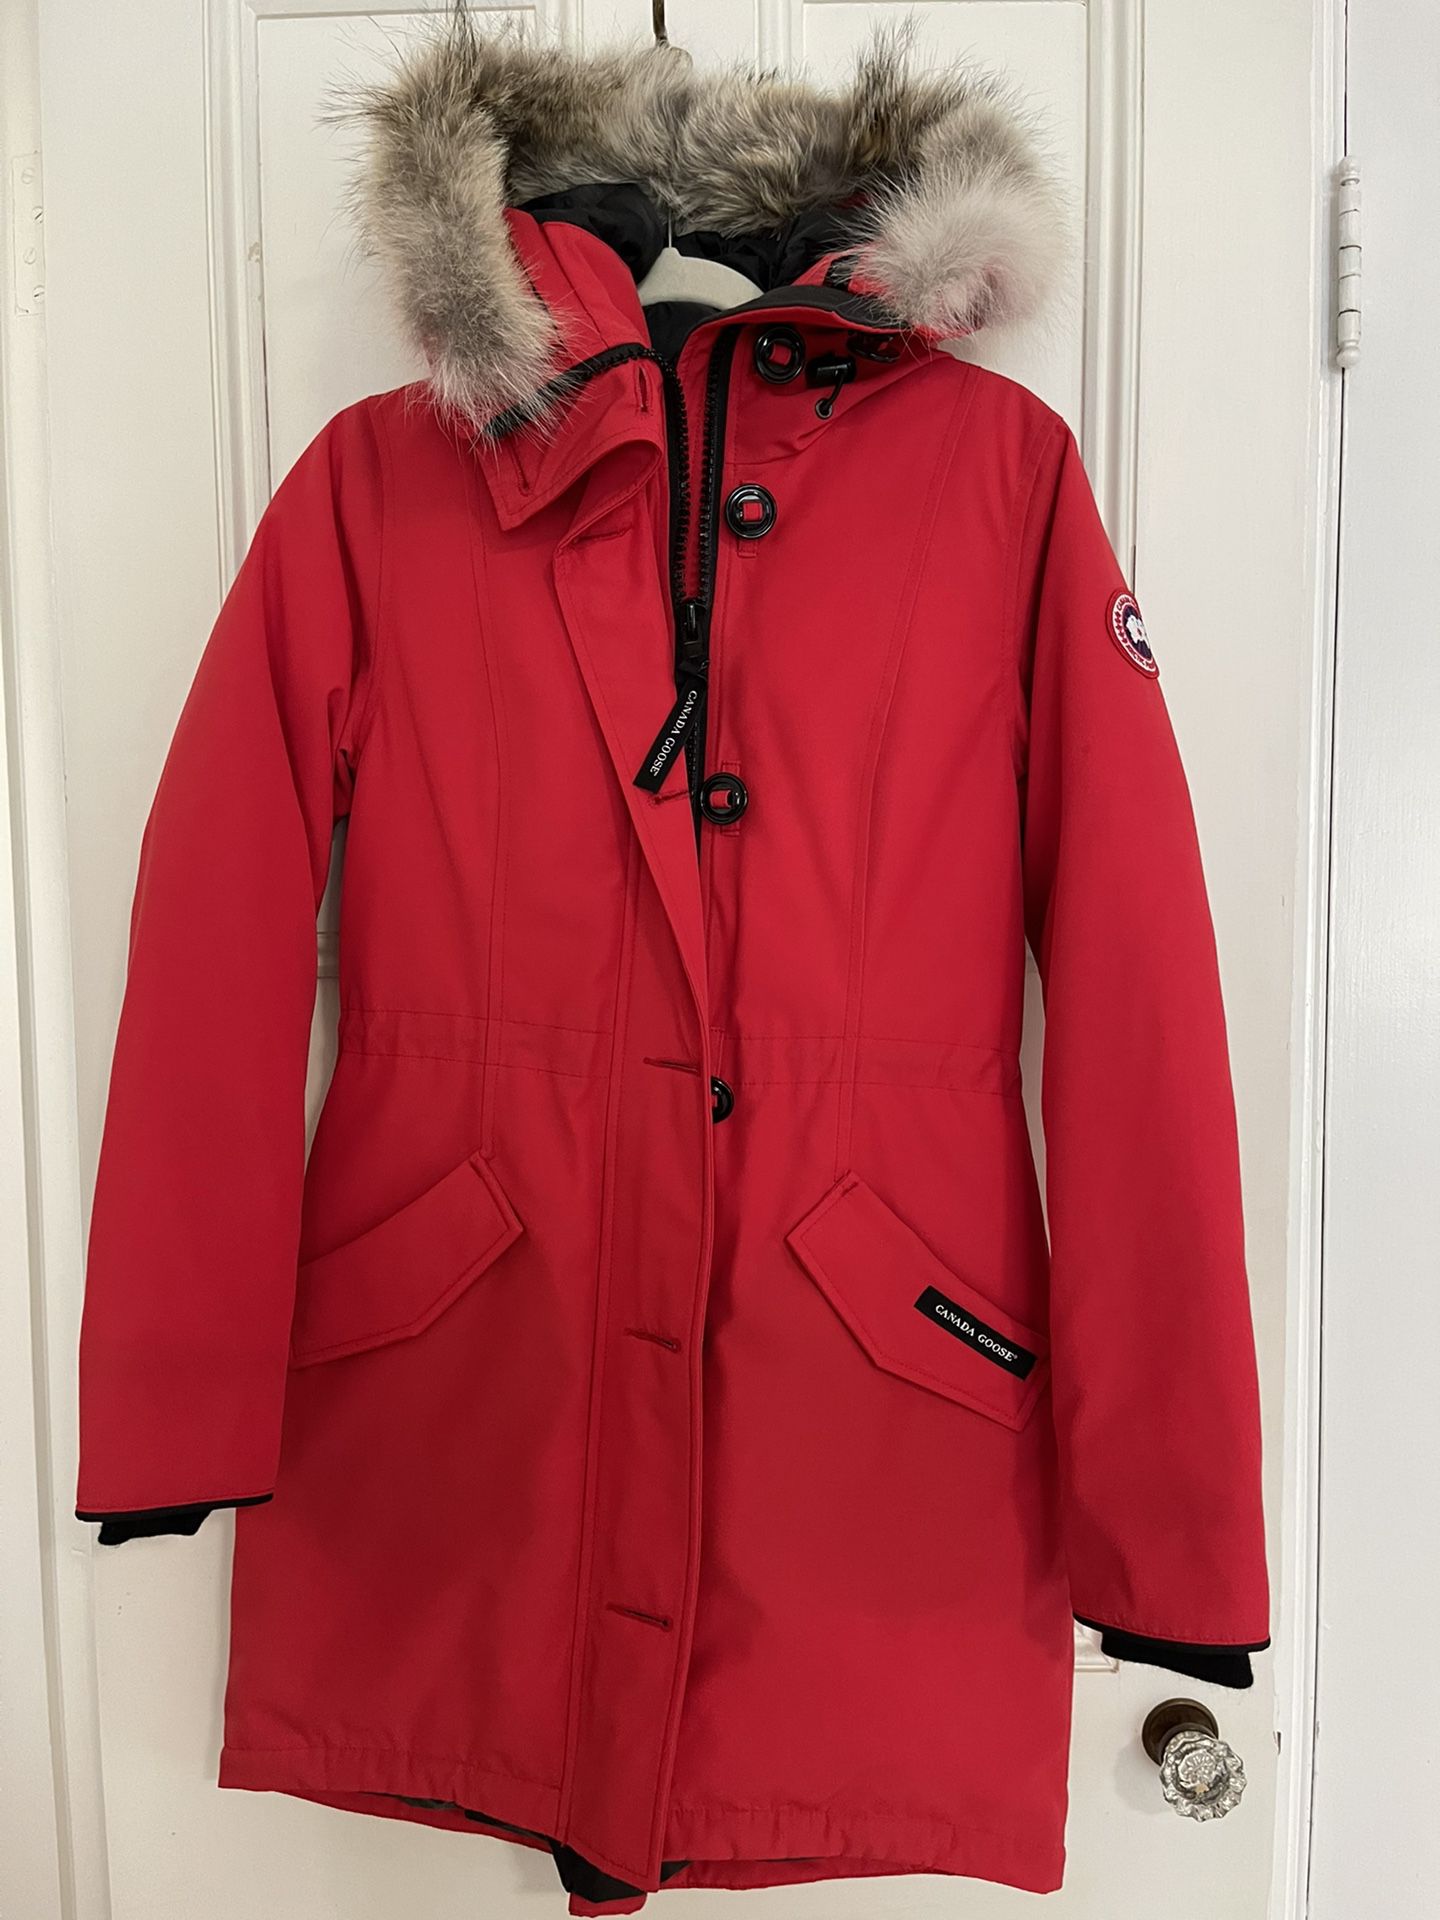 Woman Rossclair Parka Canada Goose Worn Barely Twice 